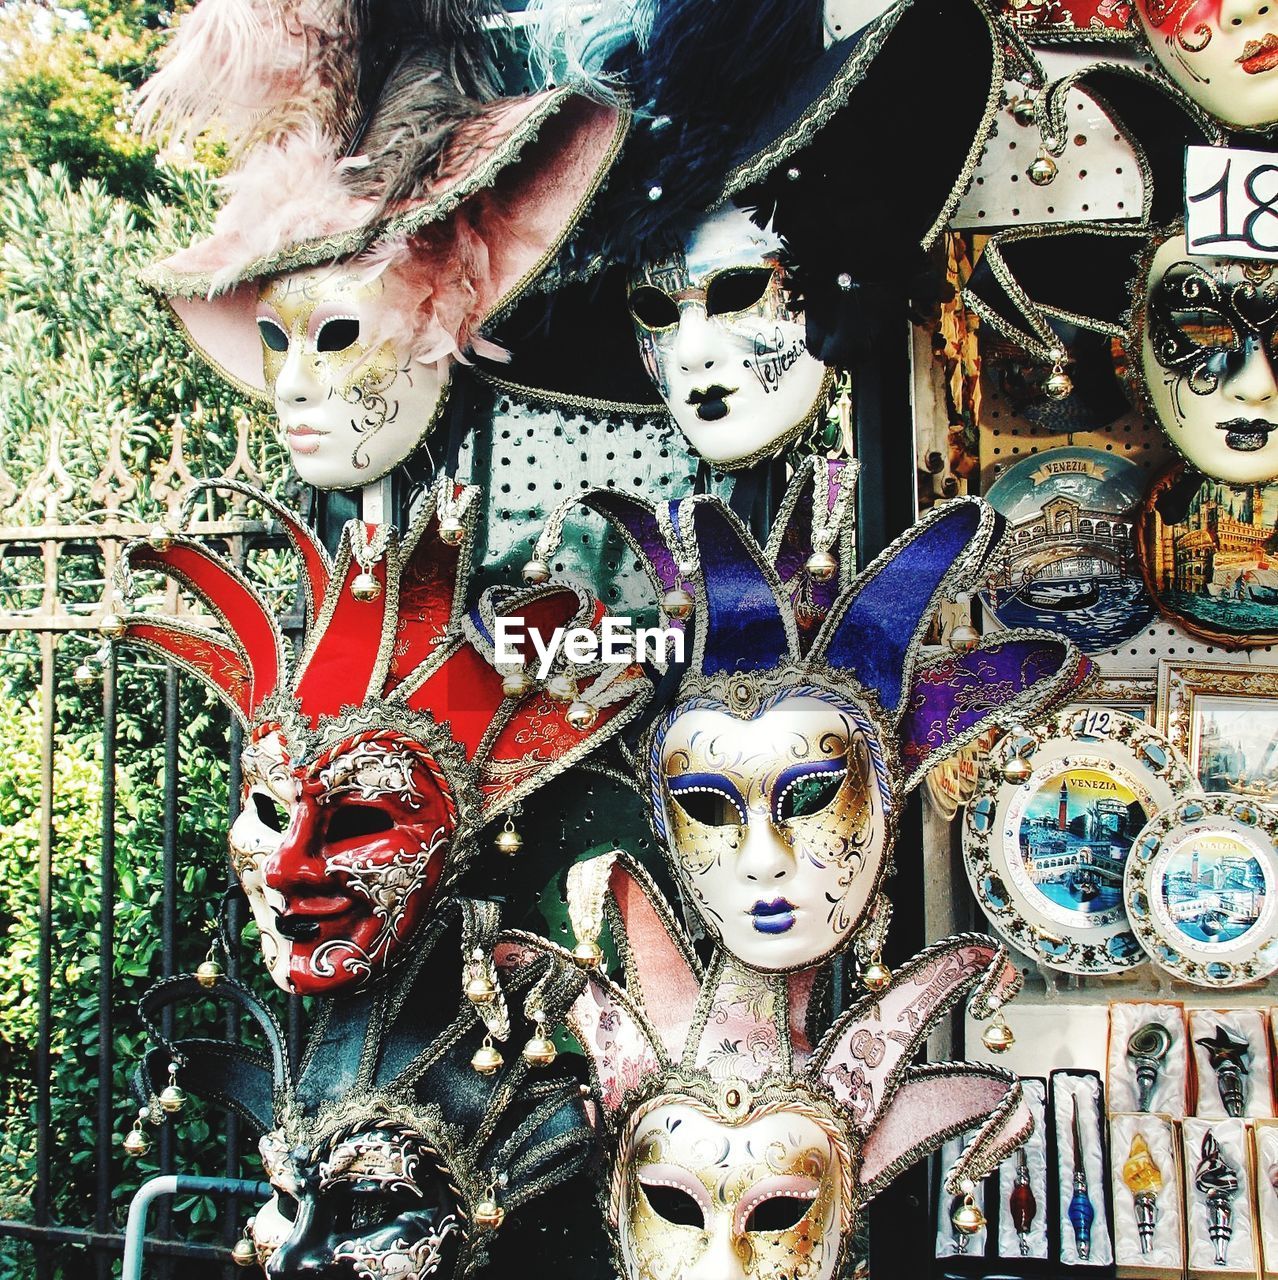 CLOSE-UP OF MASK FOR SALE AT STREET MARKET STALL